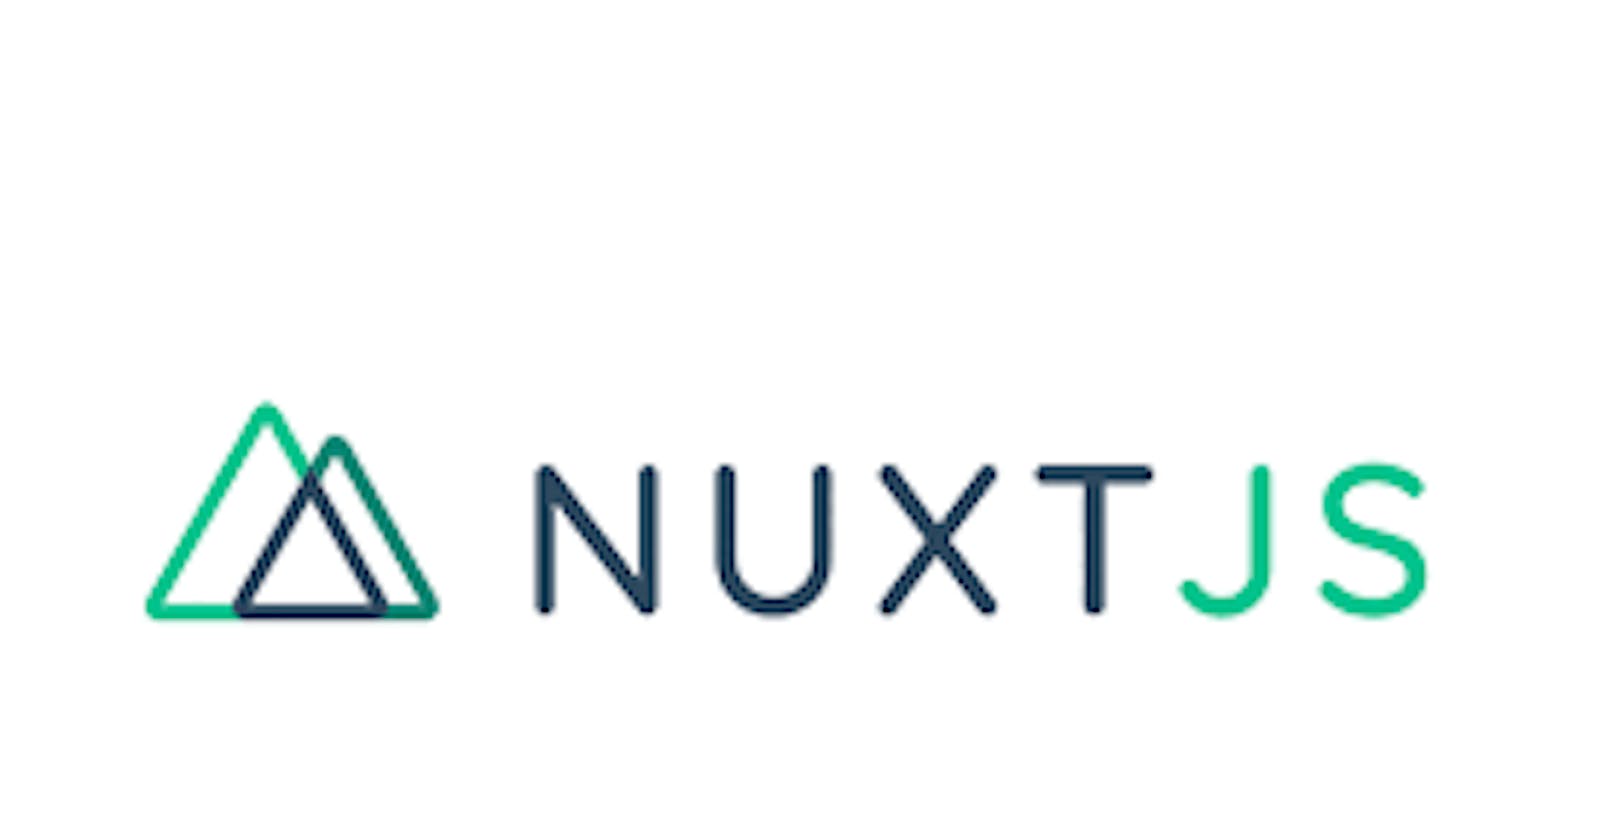 Getting Started with NuxtJs